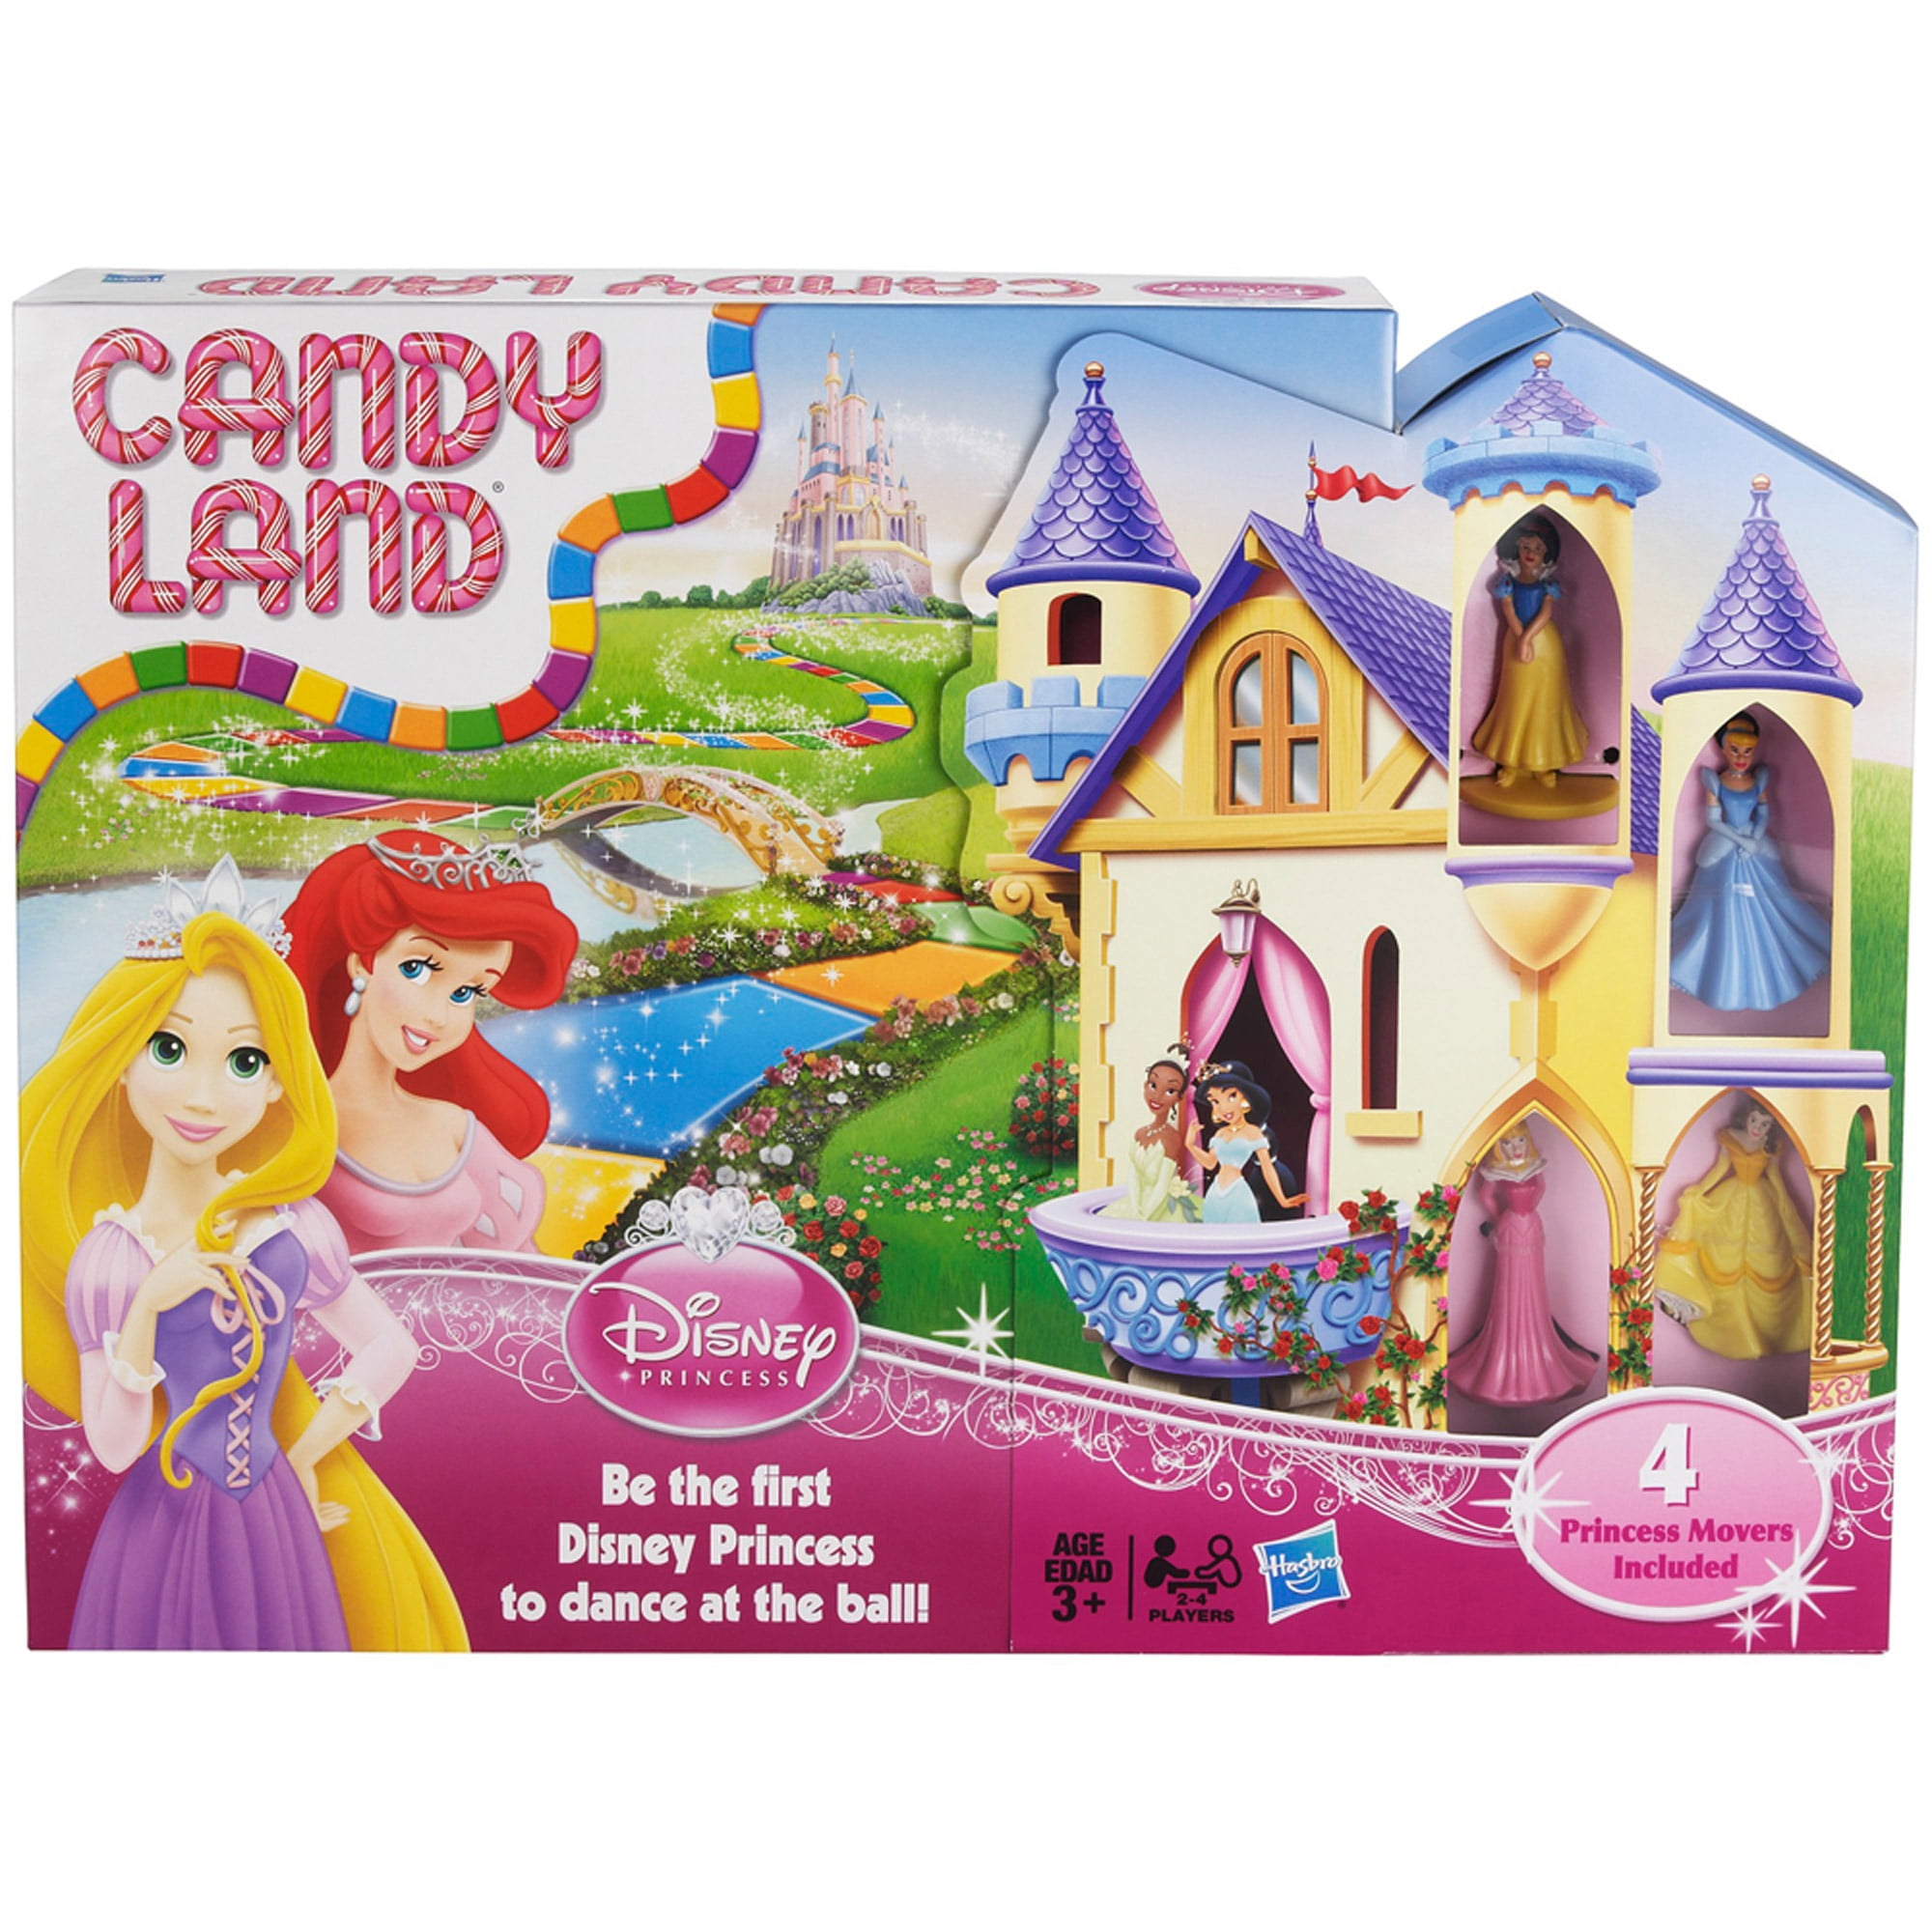 Candy Land Disney Princess Edition, For 2 to 4 players